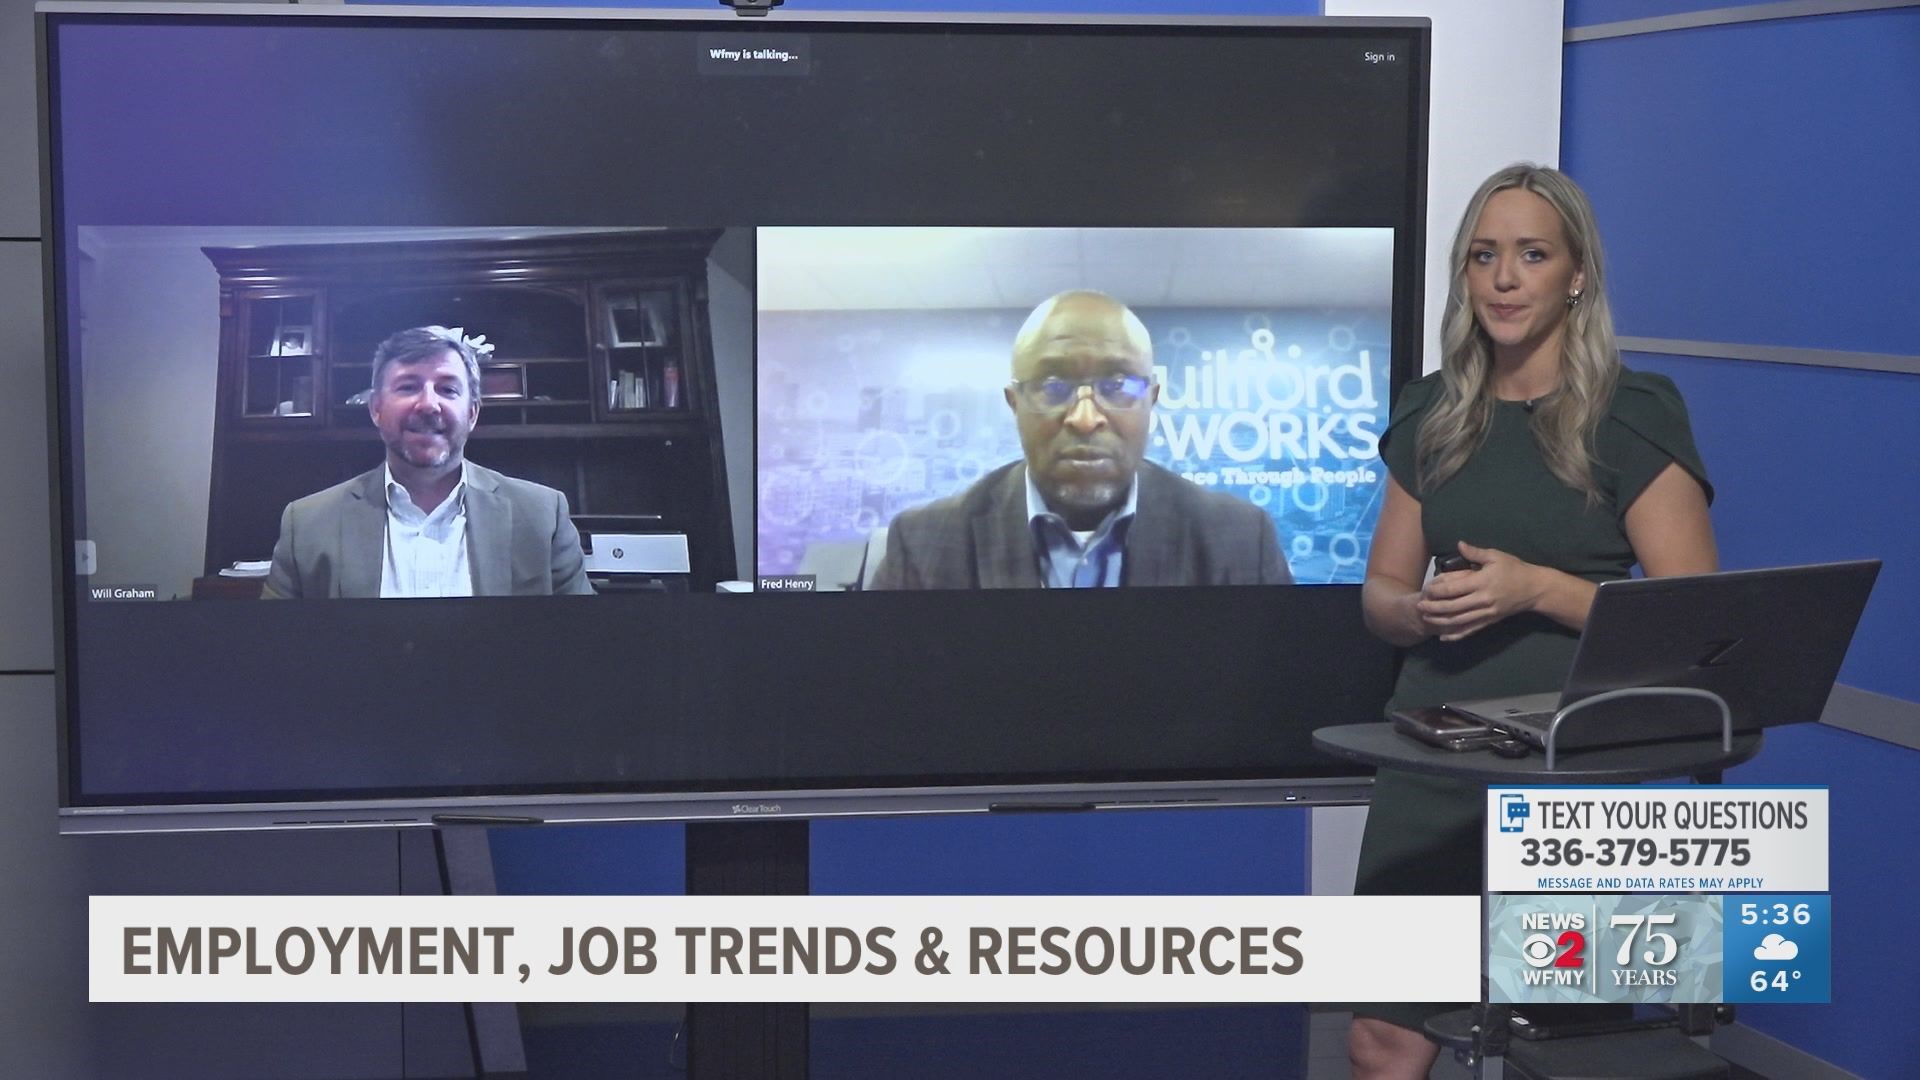 With the job market heating up, two Triad experts discuss the resources and hiring trends in the Triad.